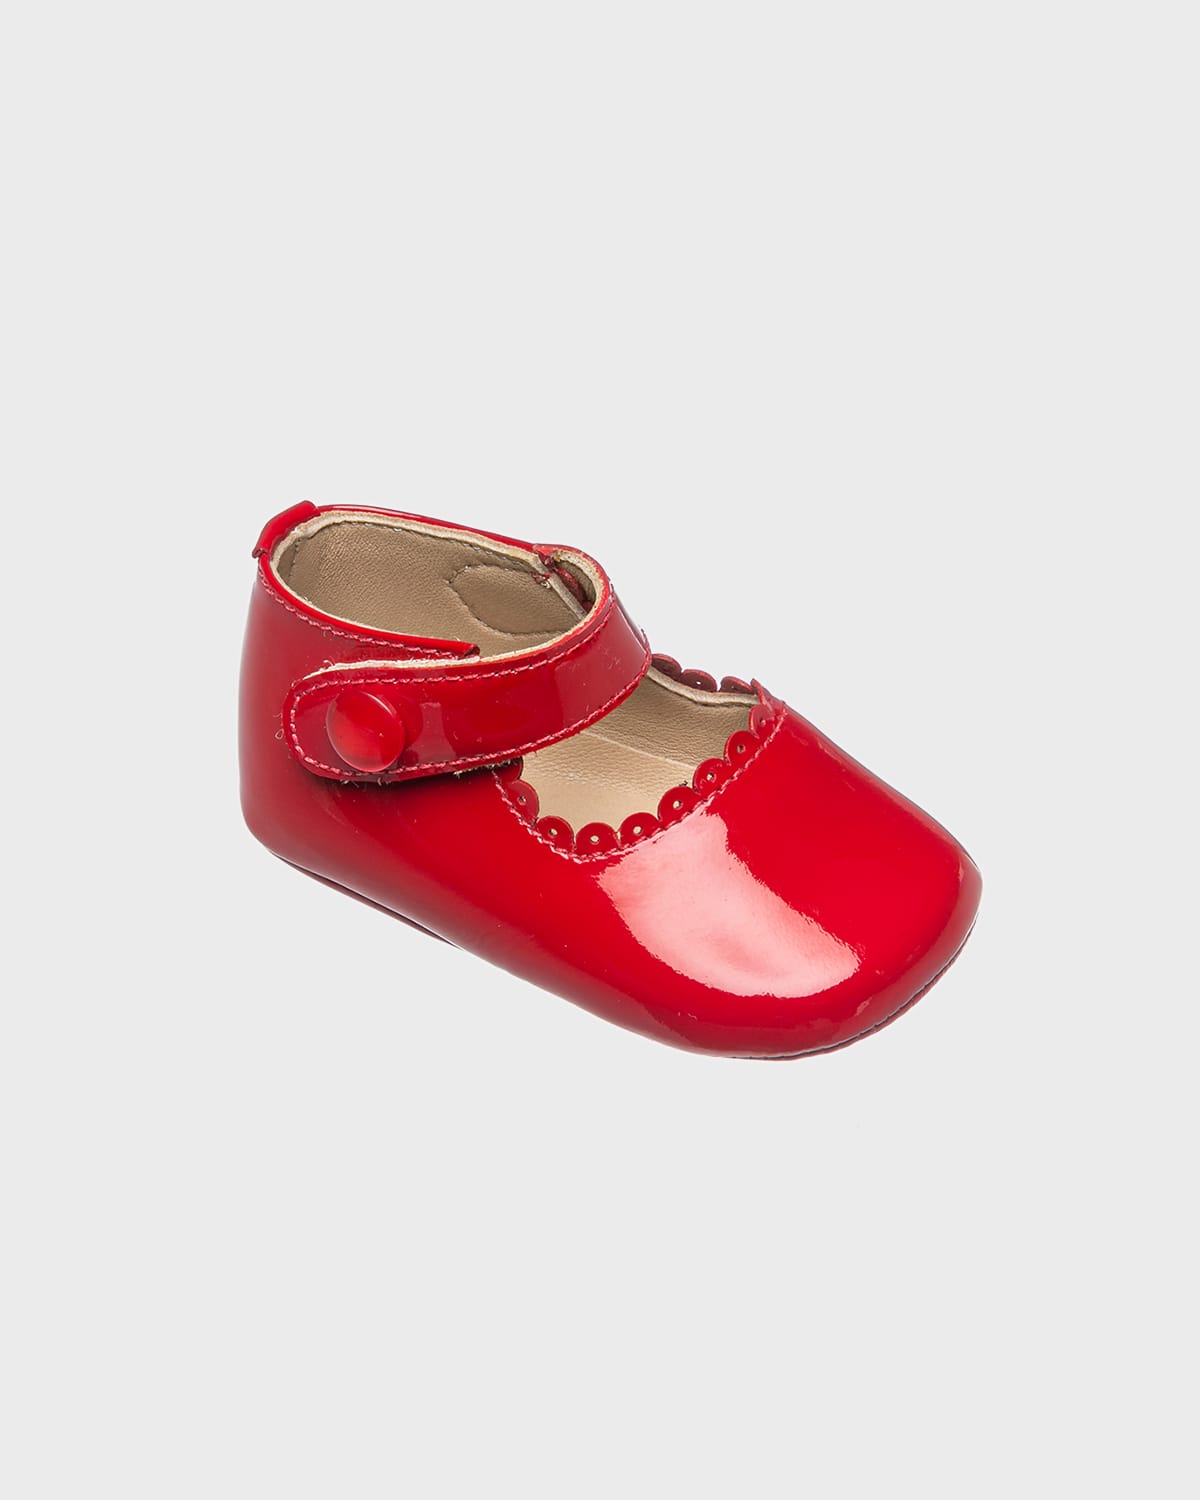 Elephantito Kids' Girl's Scalloped Leather Mary Jane, Baby In Ptn Red